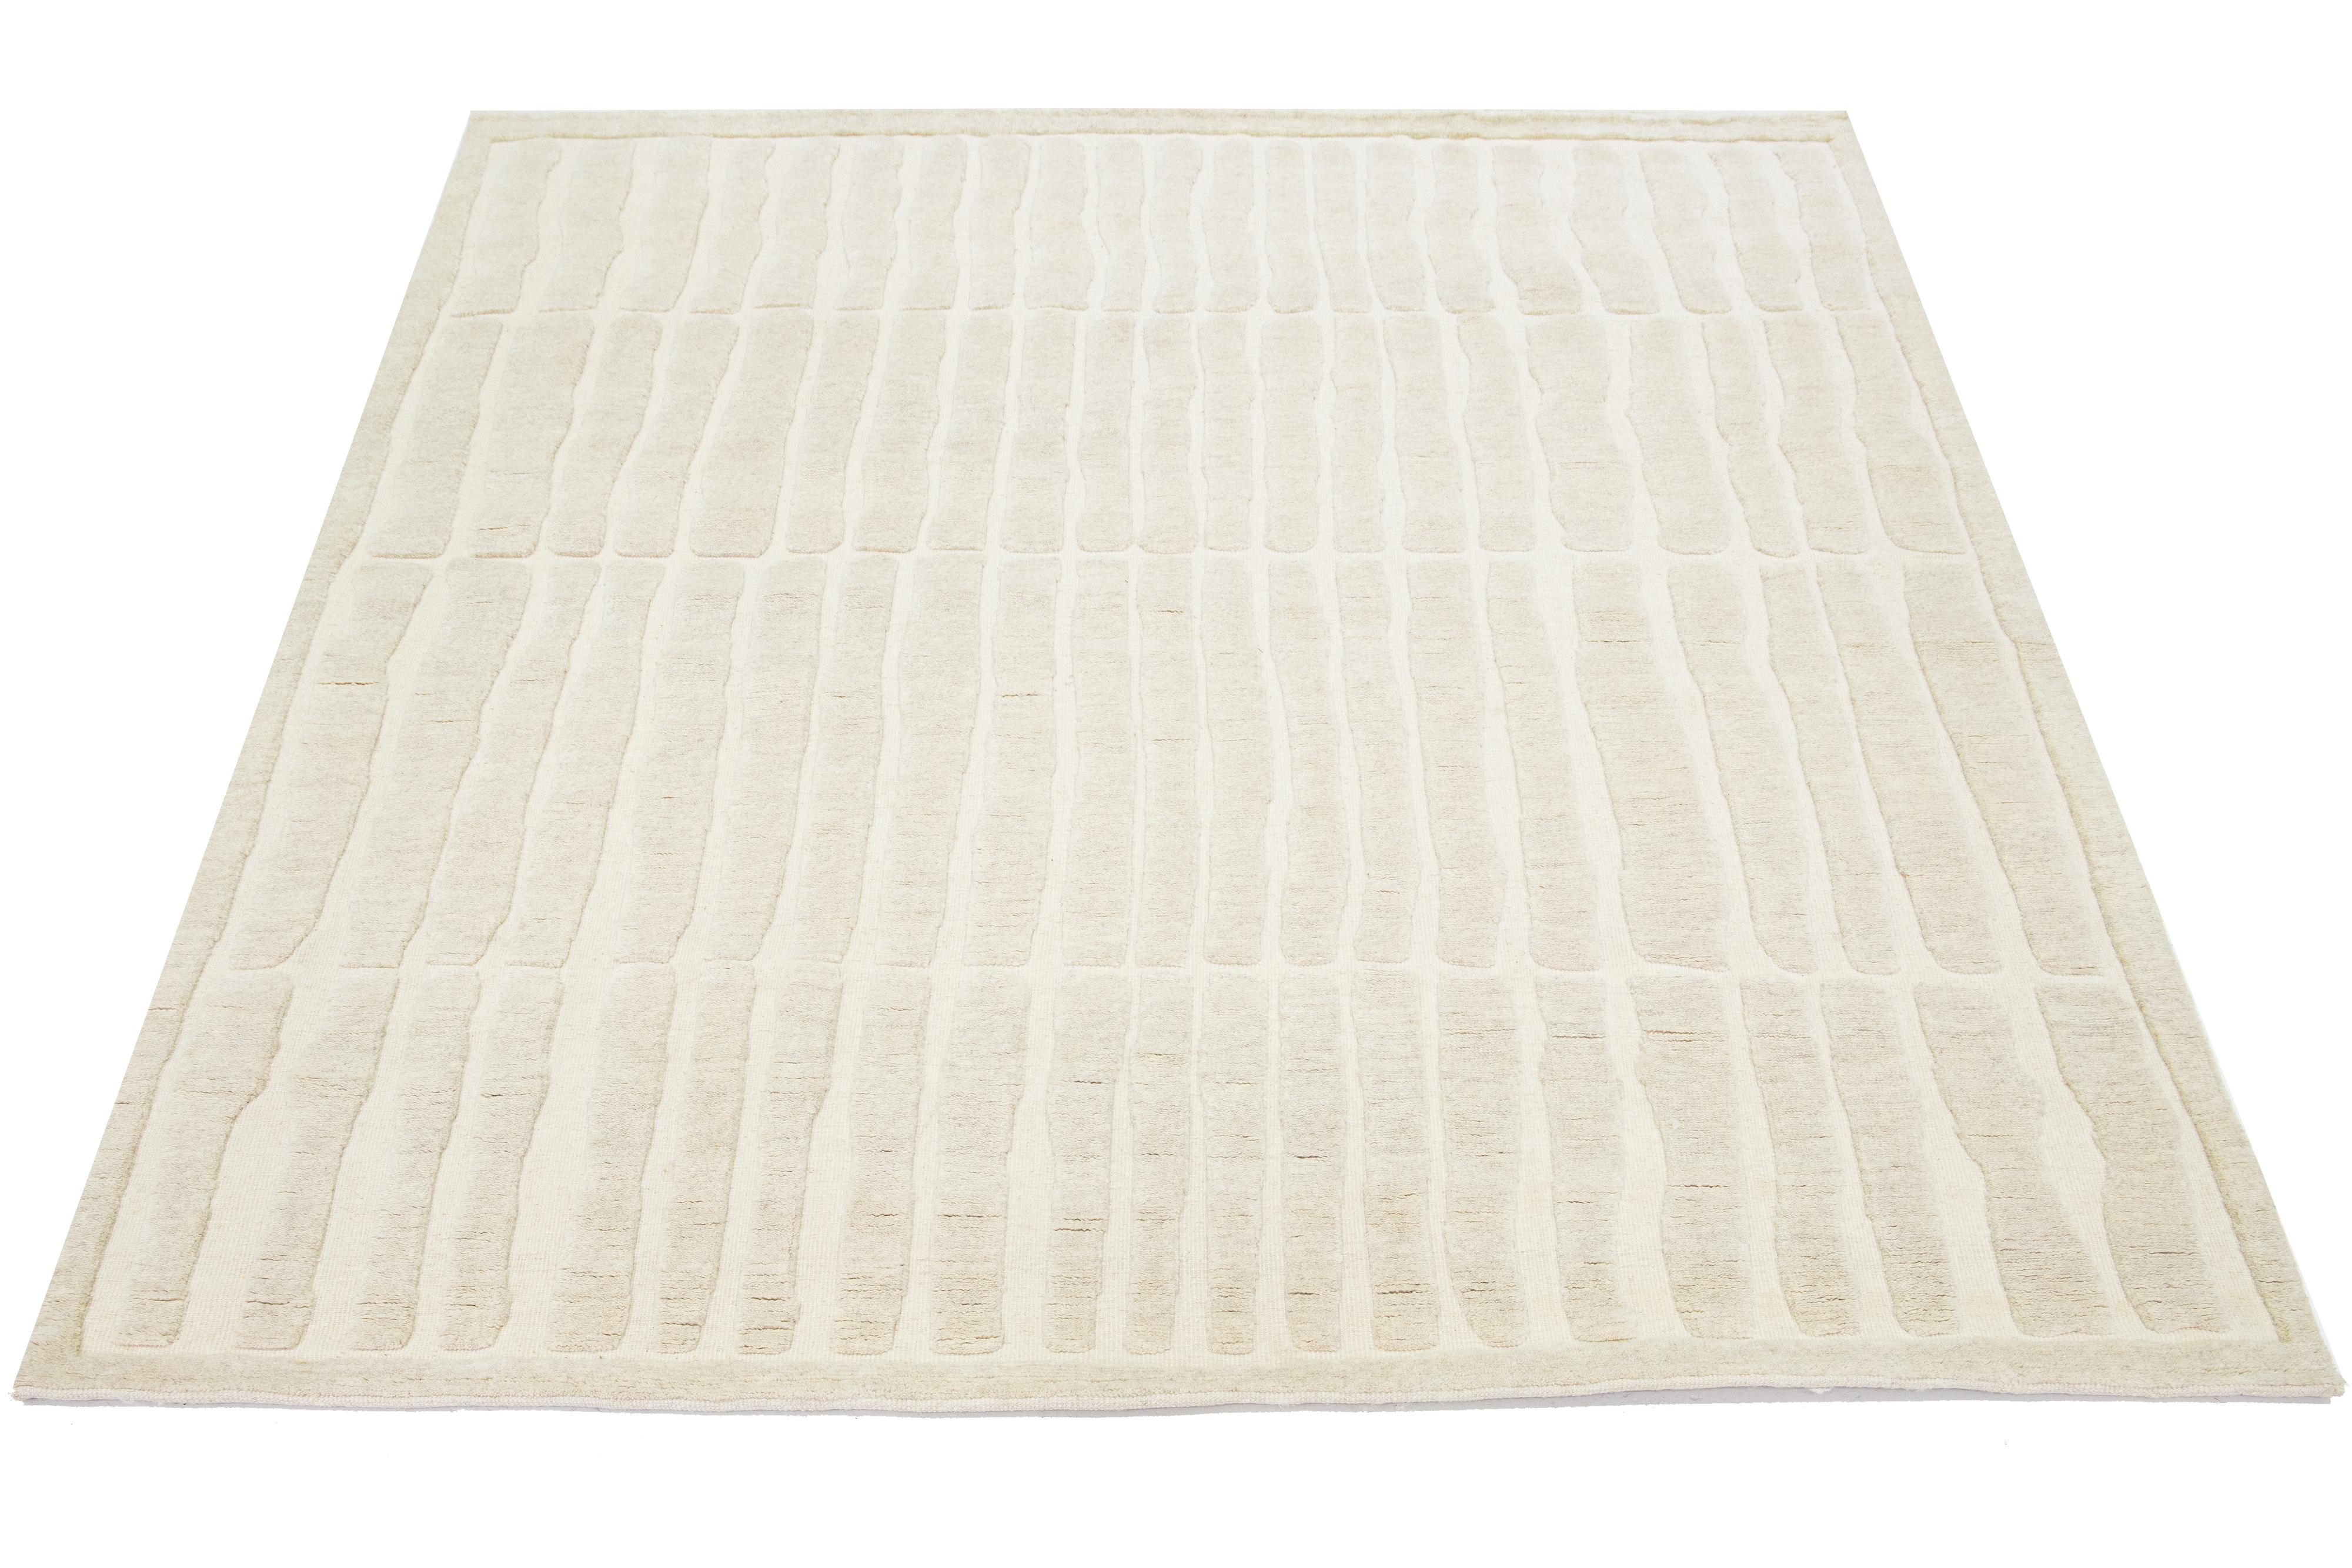 This Moroccan-style wool rug is hand-knotted and showcases a beautiful modern design with a natural ivory field. It features a stunning geometric pattern.

This rug measures 8'2